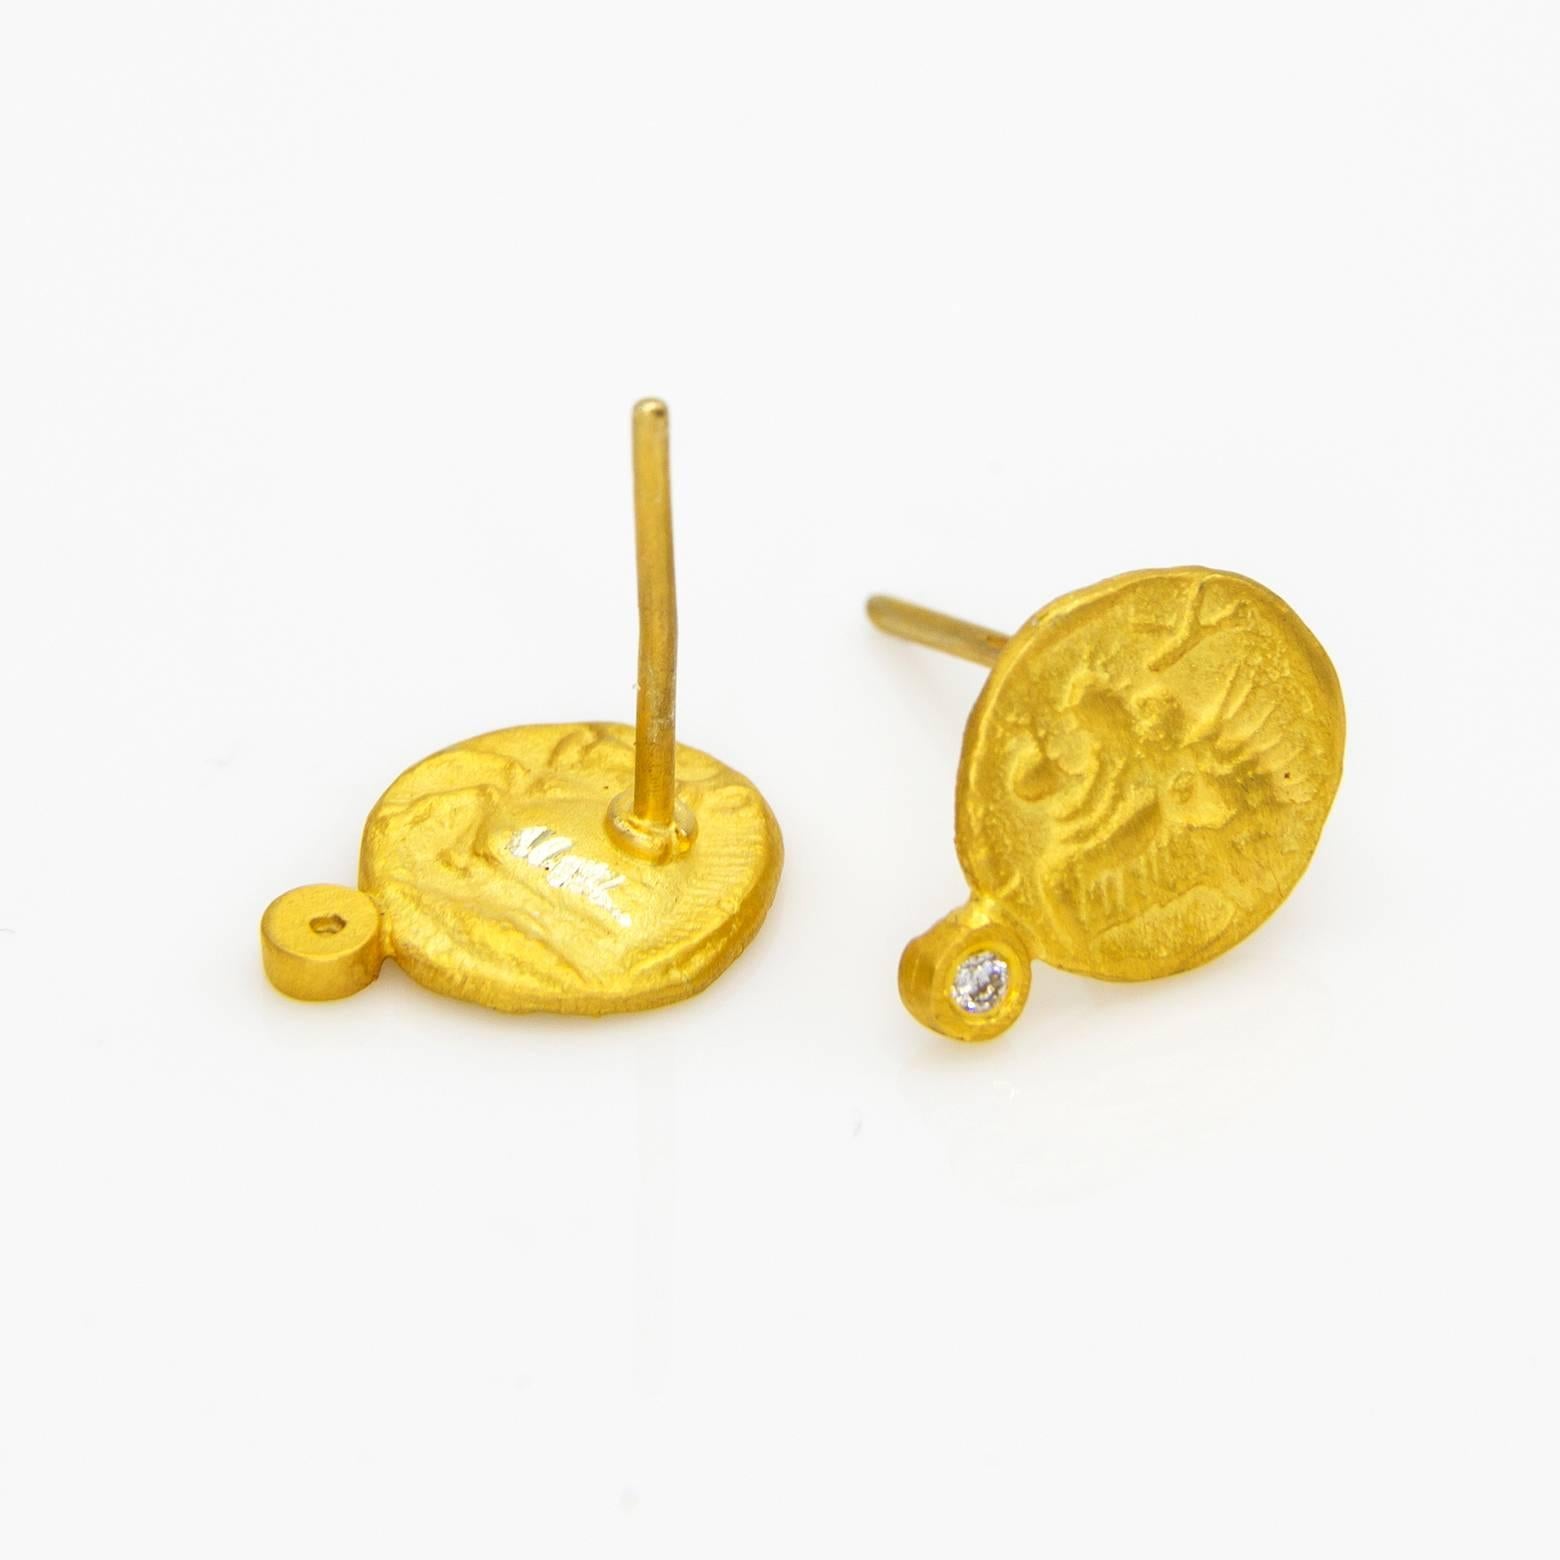 Modern Diamond Gold Stamped Coin Mythical Creature Faces Stud Earrings